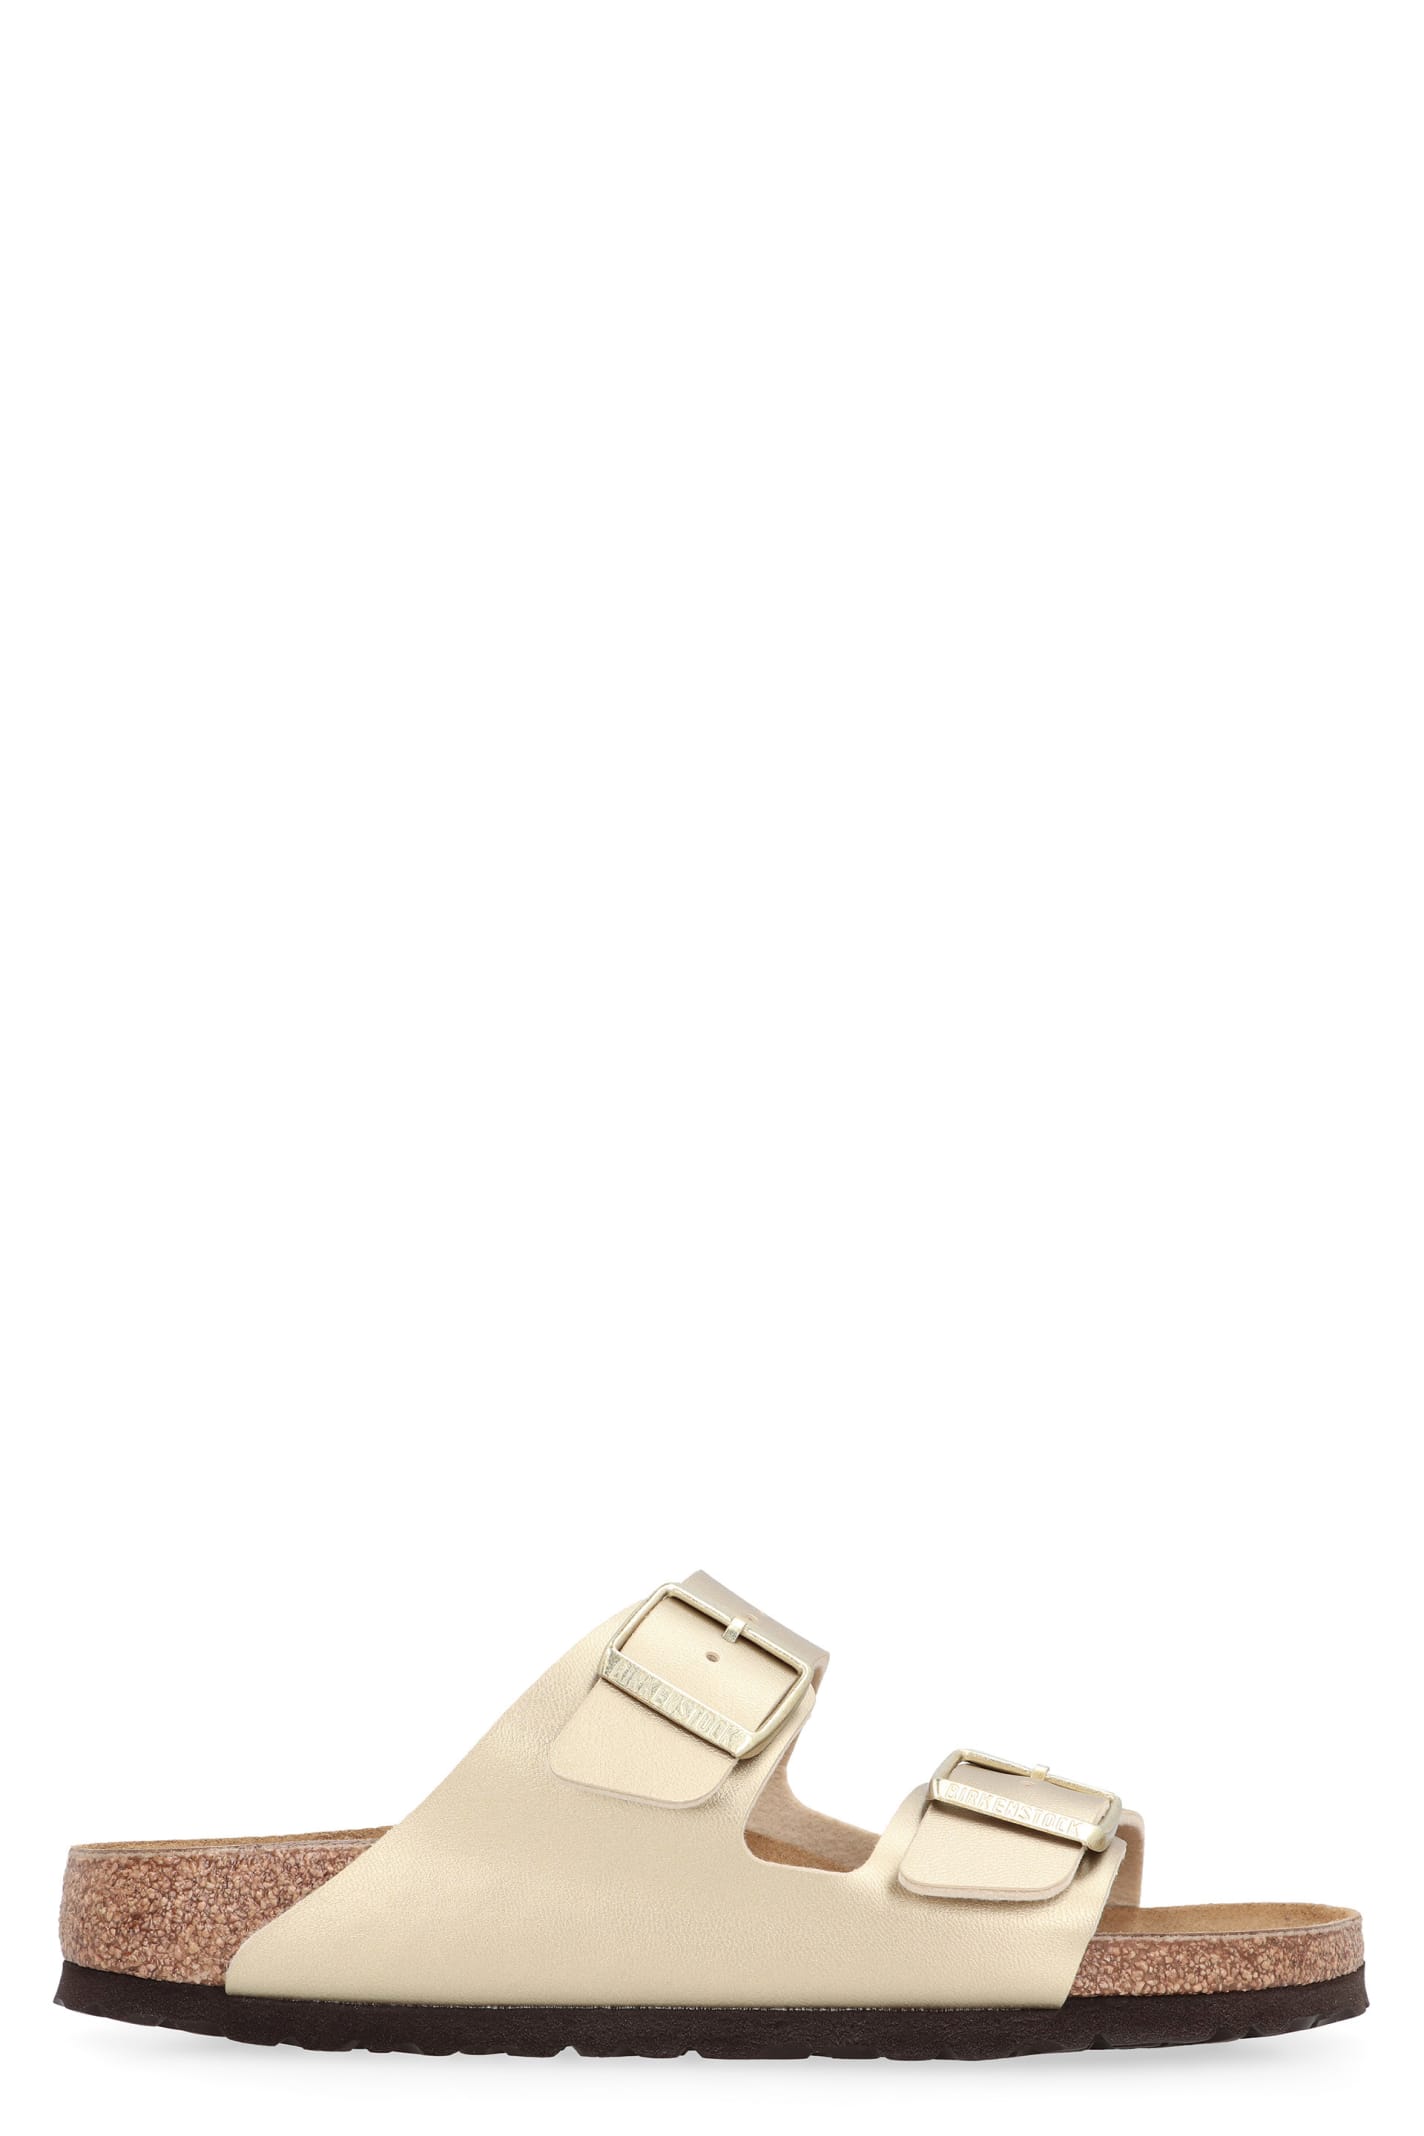 Shop Birkenstock Arizona Bs Leather Slides With Buckle In Gold